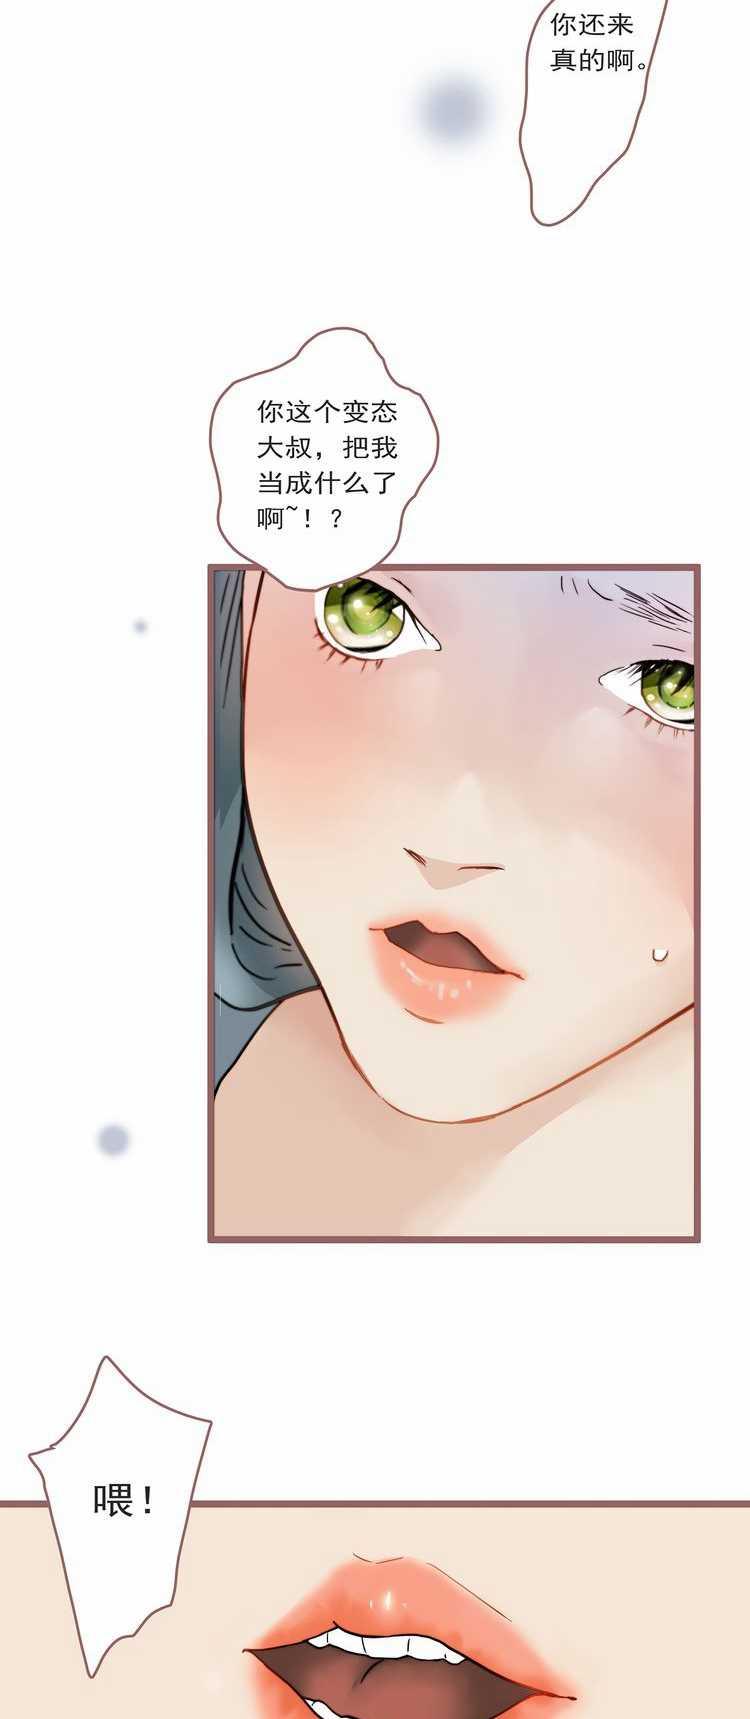 Freaky 欲望人偶第四话 Amature Porn - Page 10